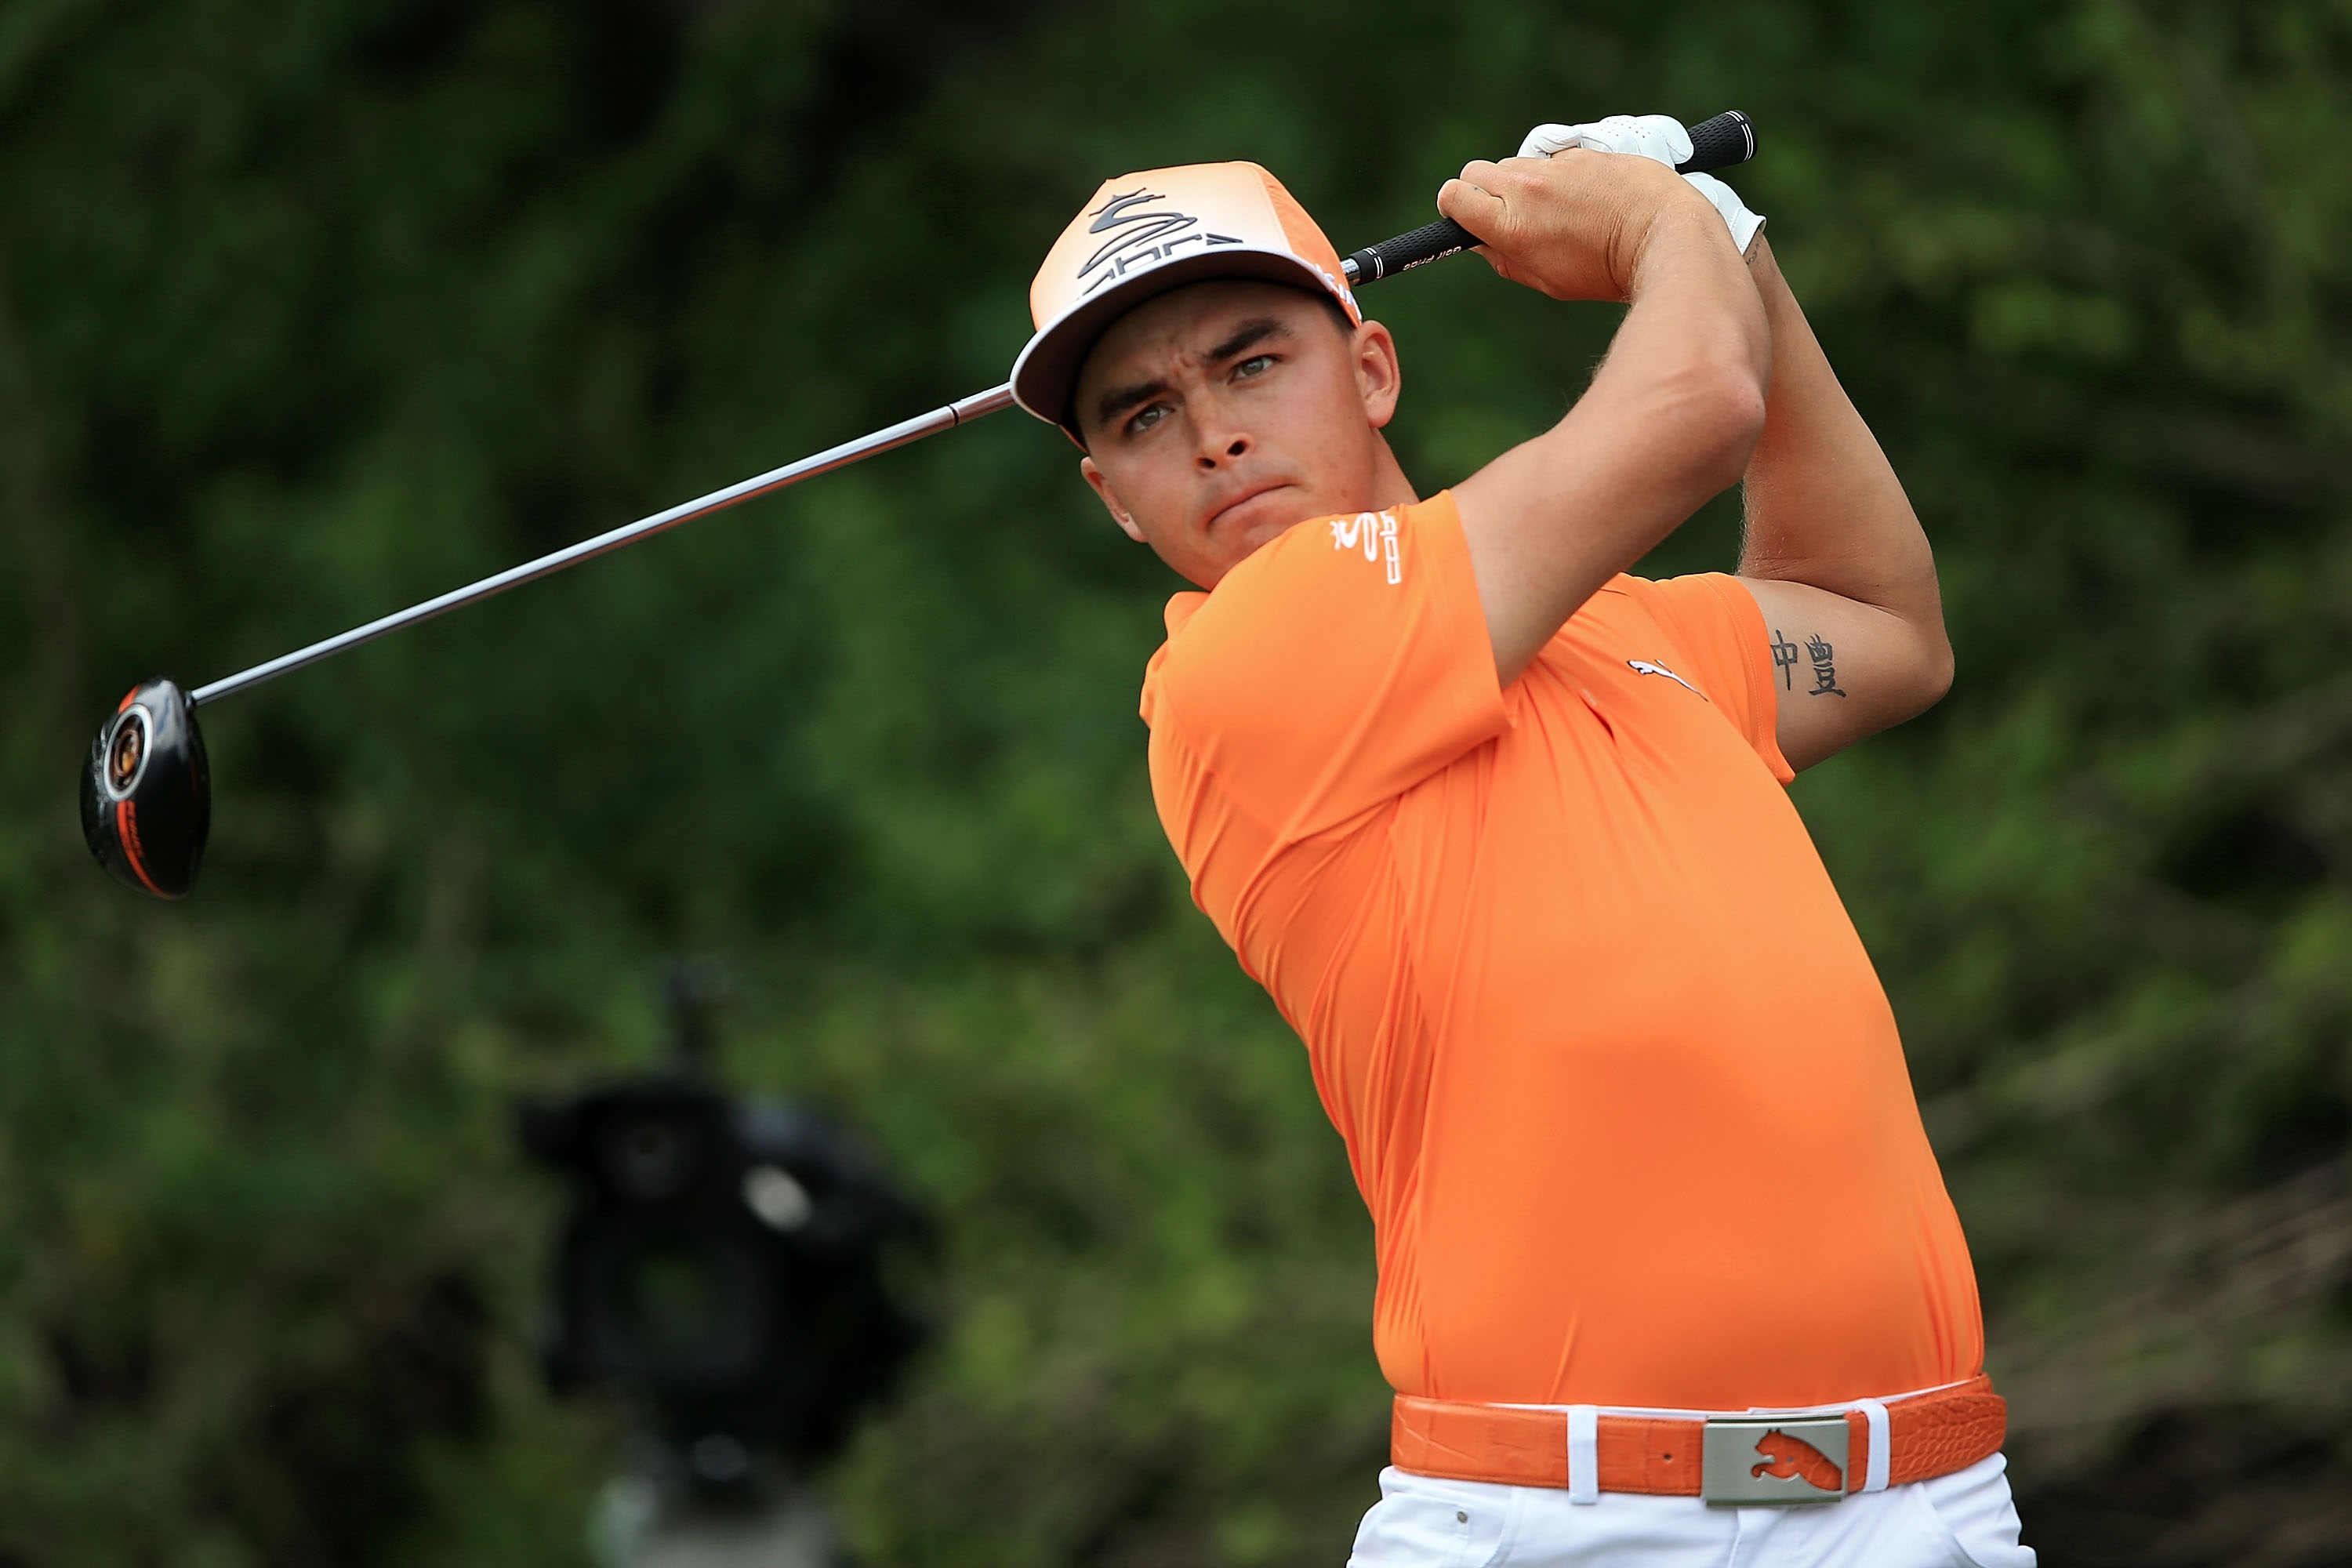 Fowler has been enjoying great success since putting the new Cobra KING Ltd driver in play